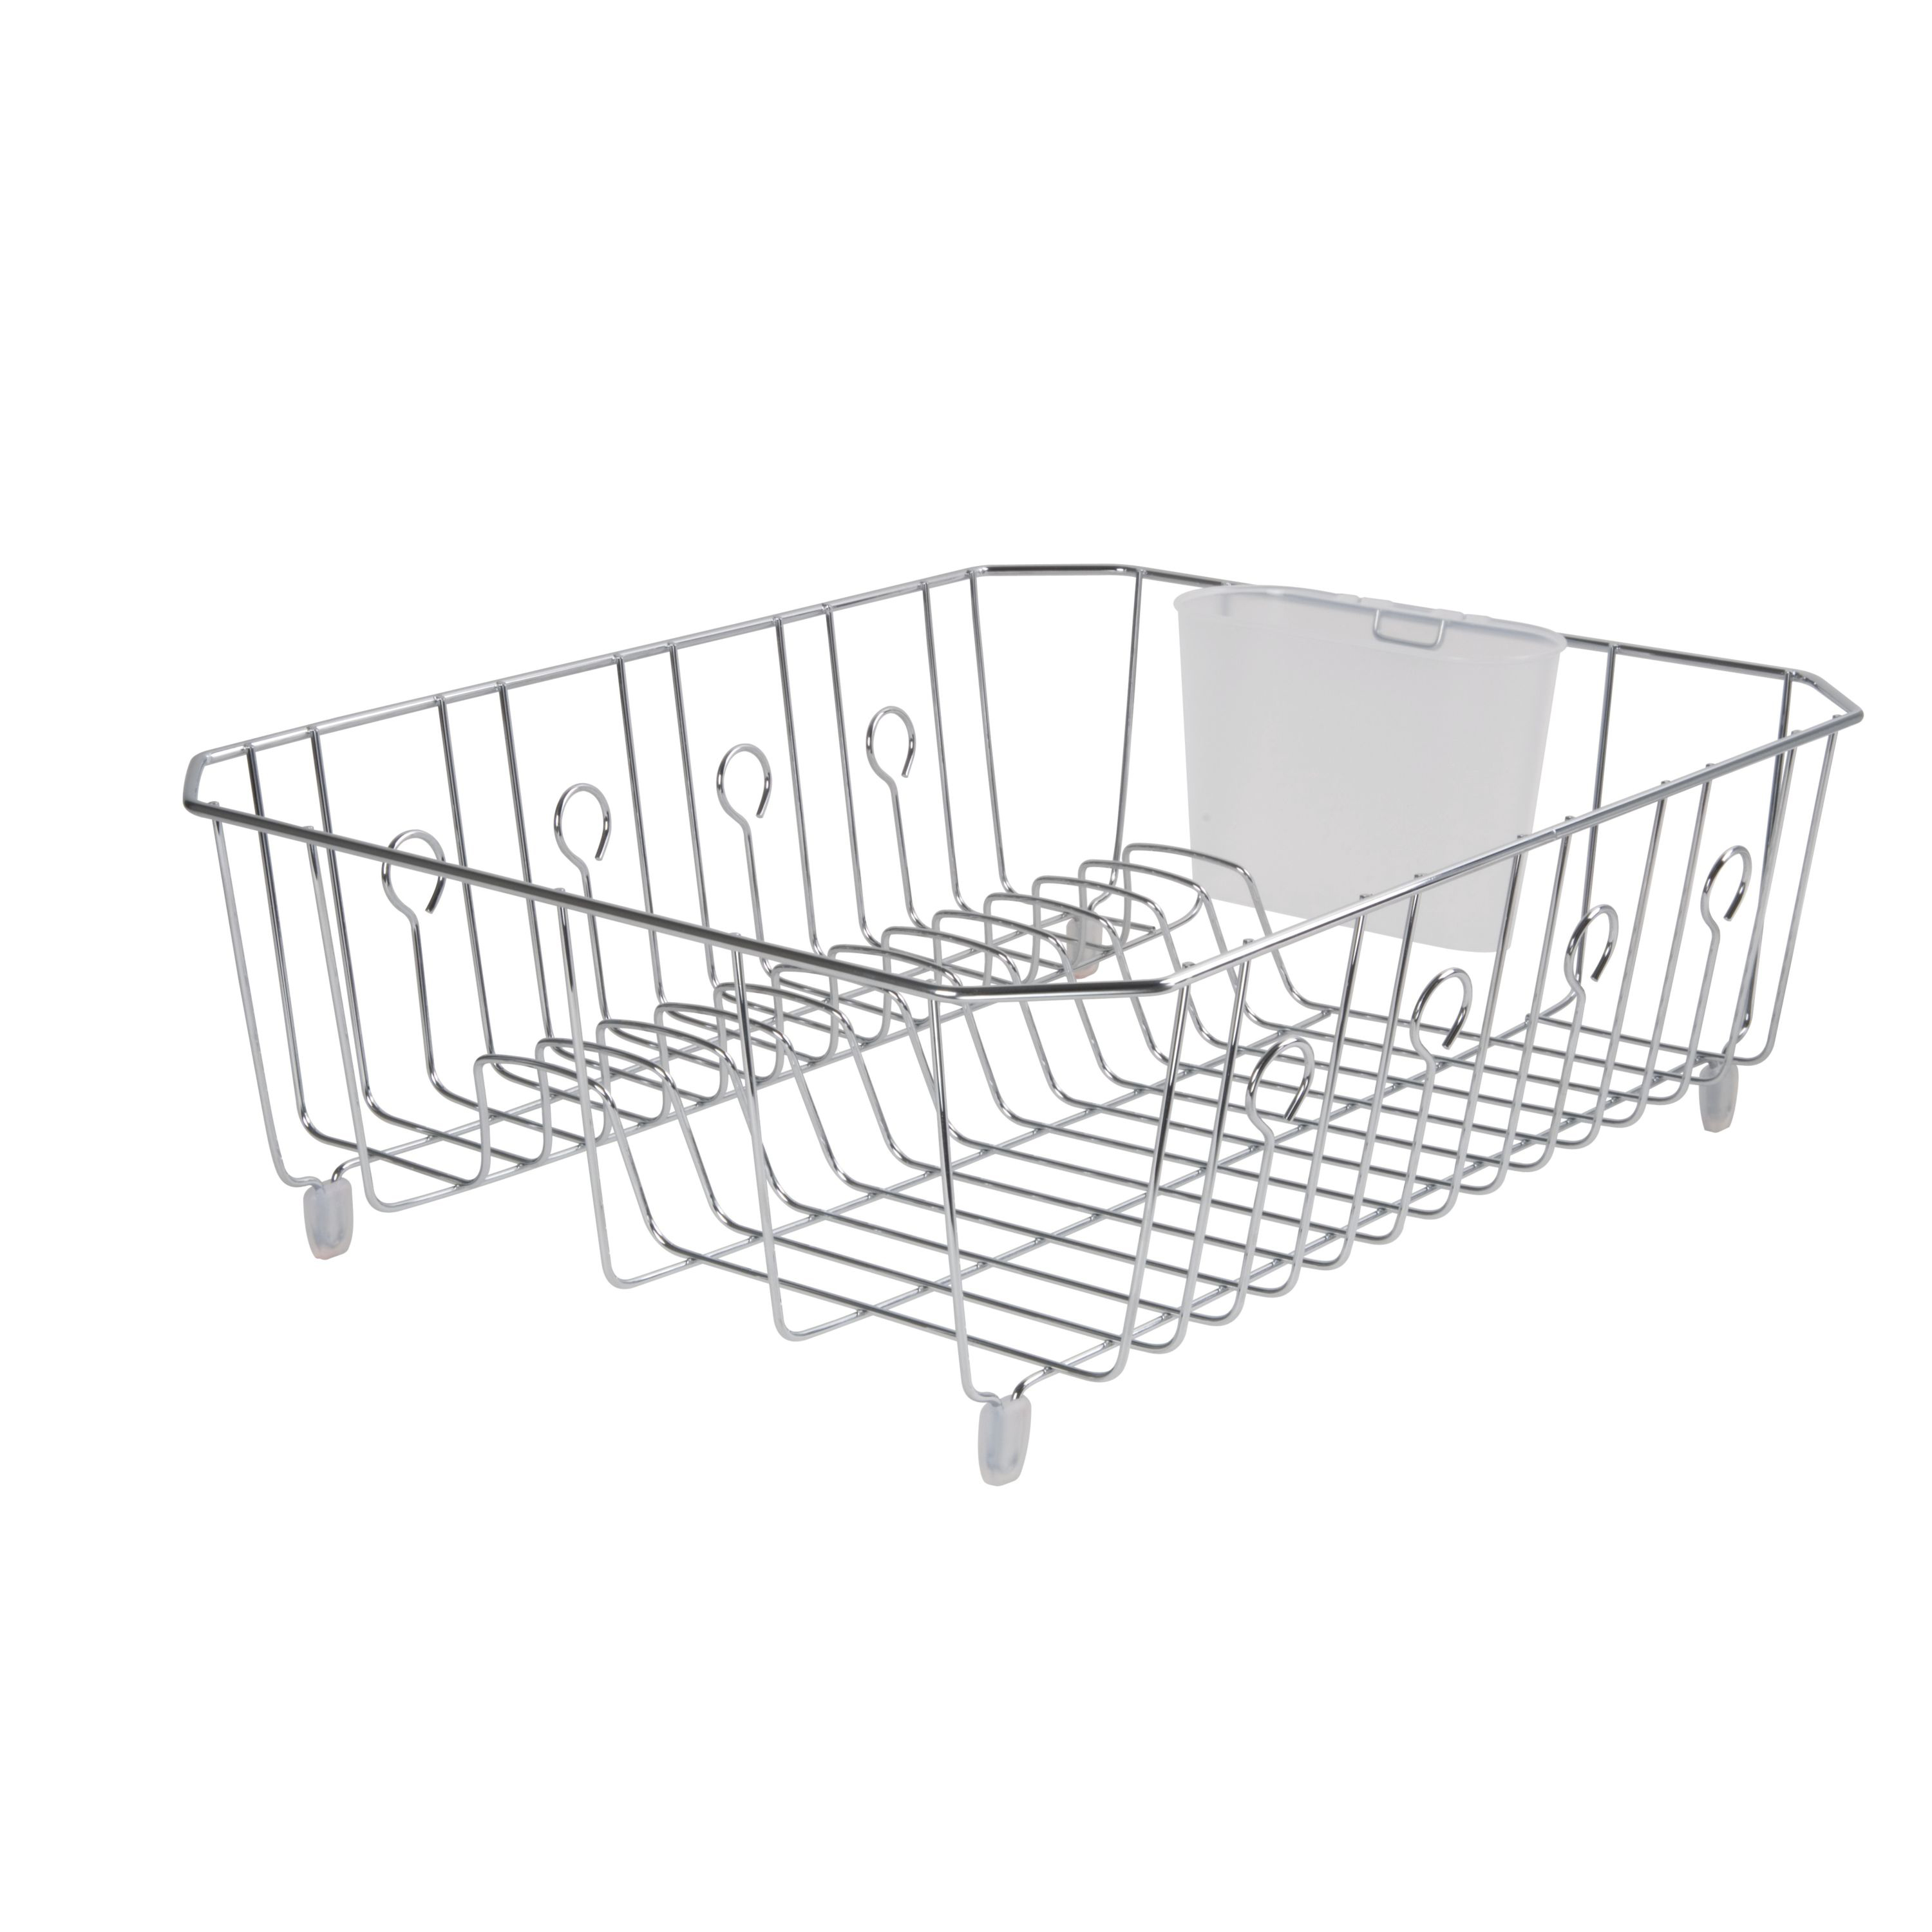 Dish Drying Rack, Rubbermaid Dish Rack with Utensil Holder for Kitchen Countertop, Large, Chrome - image 2 of 5